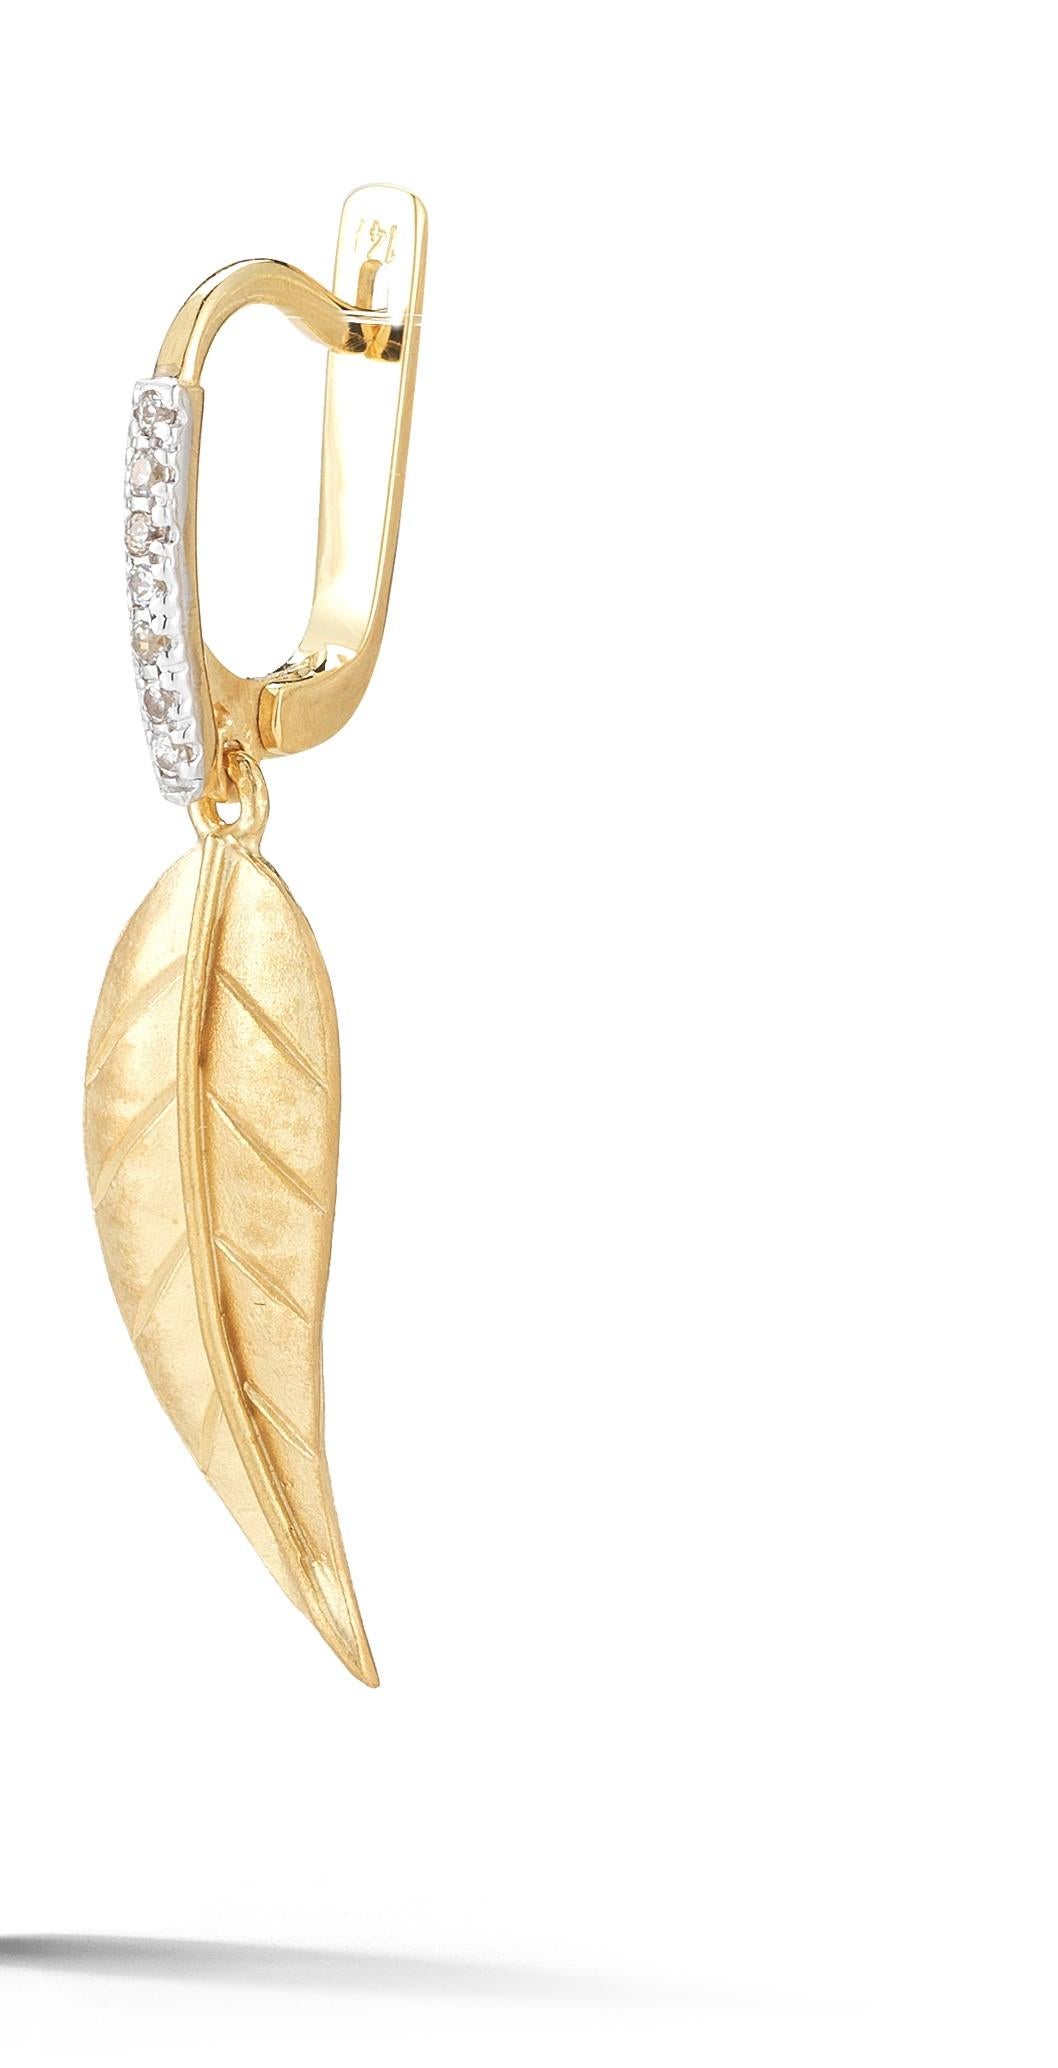 14 Karat Yellow Gold Hand-Crafted Matte-Finish Dangling Leaf Earrings on Lever-Back, Accented with 0.11 Carats of Pave Set Diamonds.
